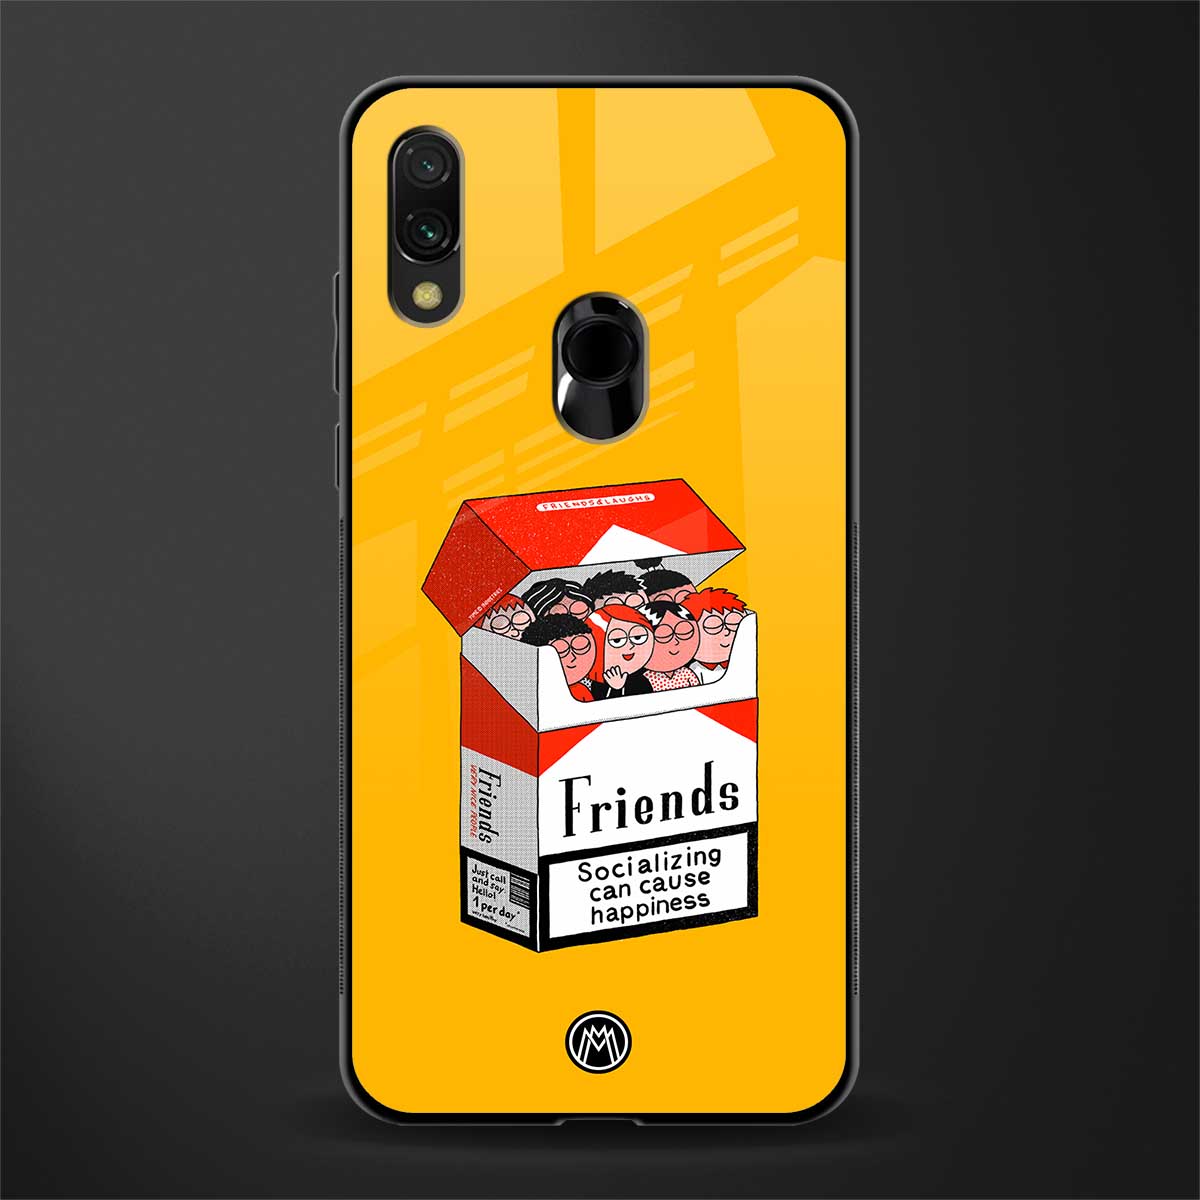 socializing can cause happiness glass case for redmi note 7 pro image